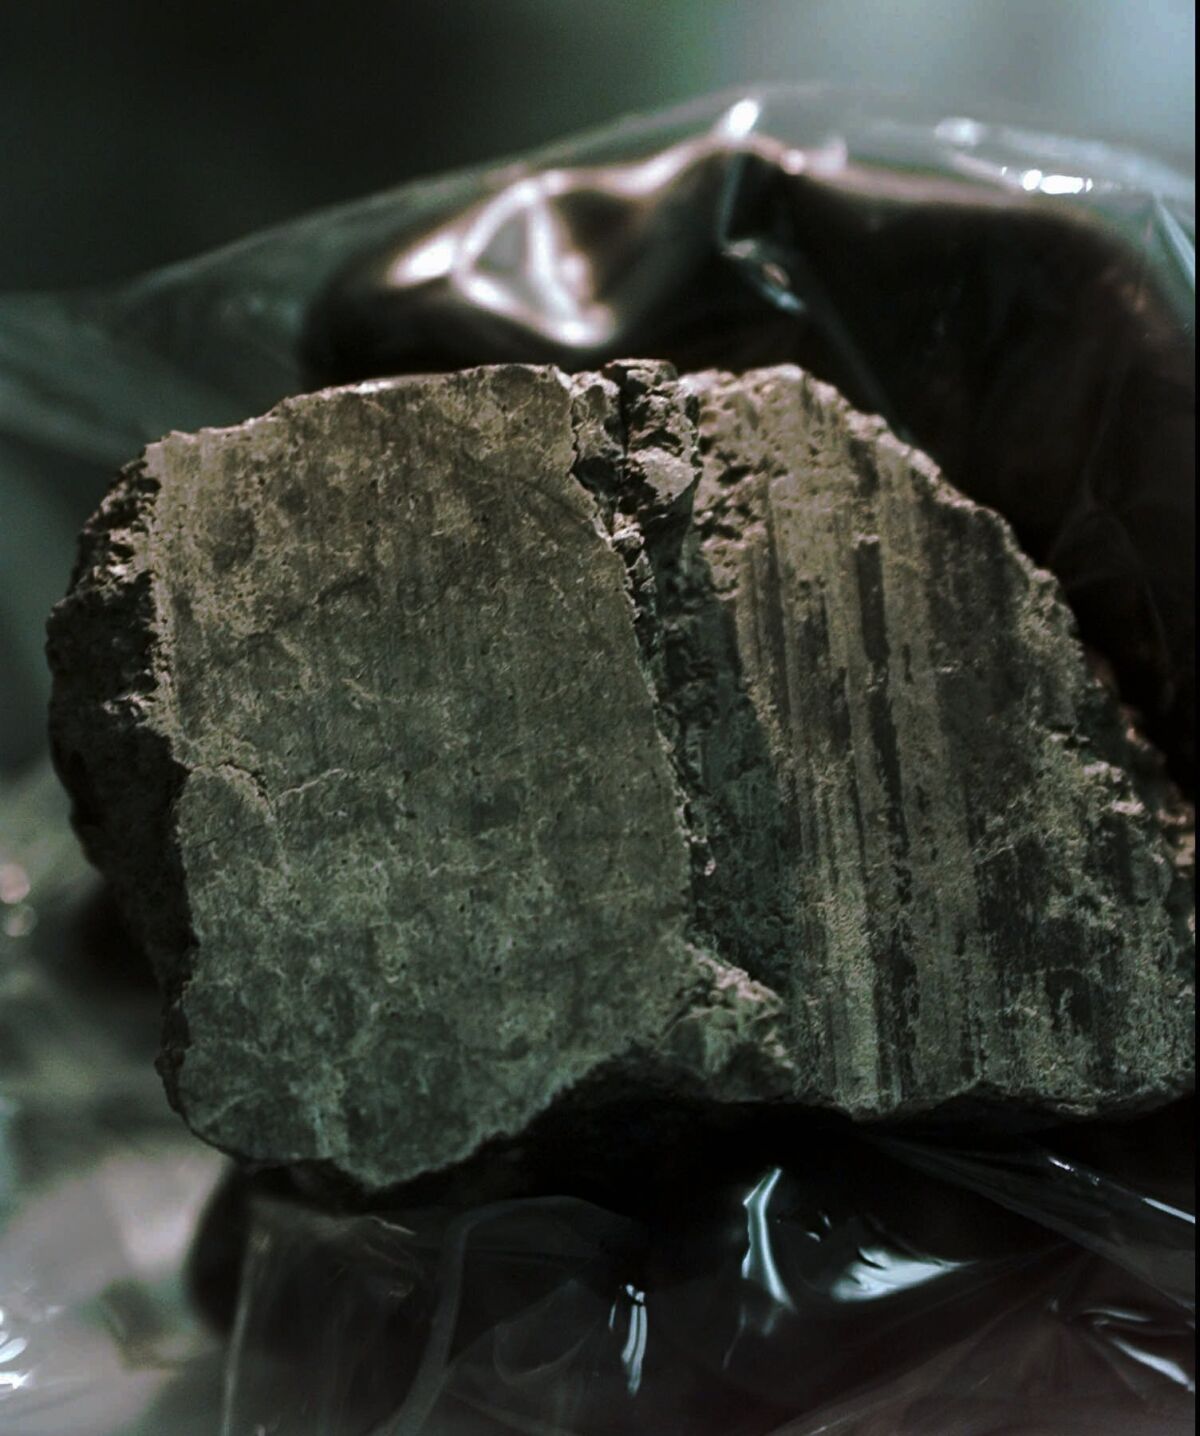 FILE - The meteorite labeled ALH84001 is held in the hand of a scientist at a Johnson Space Center lab in Houston, Aug. 7, 1996. Scientists say they've confirmed the meteorite from Mars contains no evidence of ancient Martian life. The rock caused a splash 25 years ago when a NASA-led team announced that its organic compounds may have been left by living creatures, however primitive. Researchers chipped away at that theory over the decades. A team of scientists led by Andrew Steele of the Carnegie Institution published their findings Thursday, Jan. 13, 2022. (AP Photo/David J. Phillip)